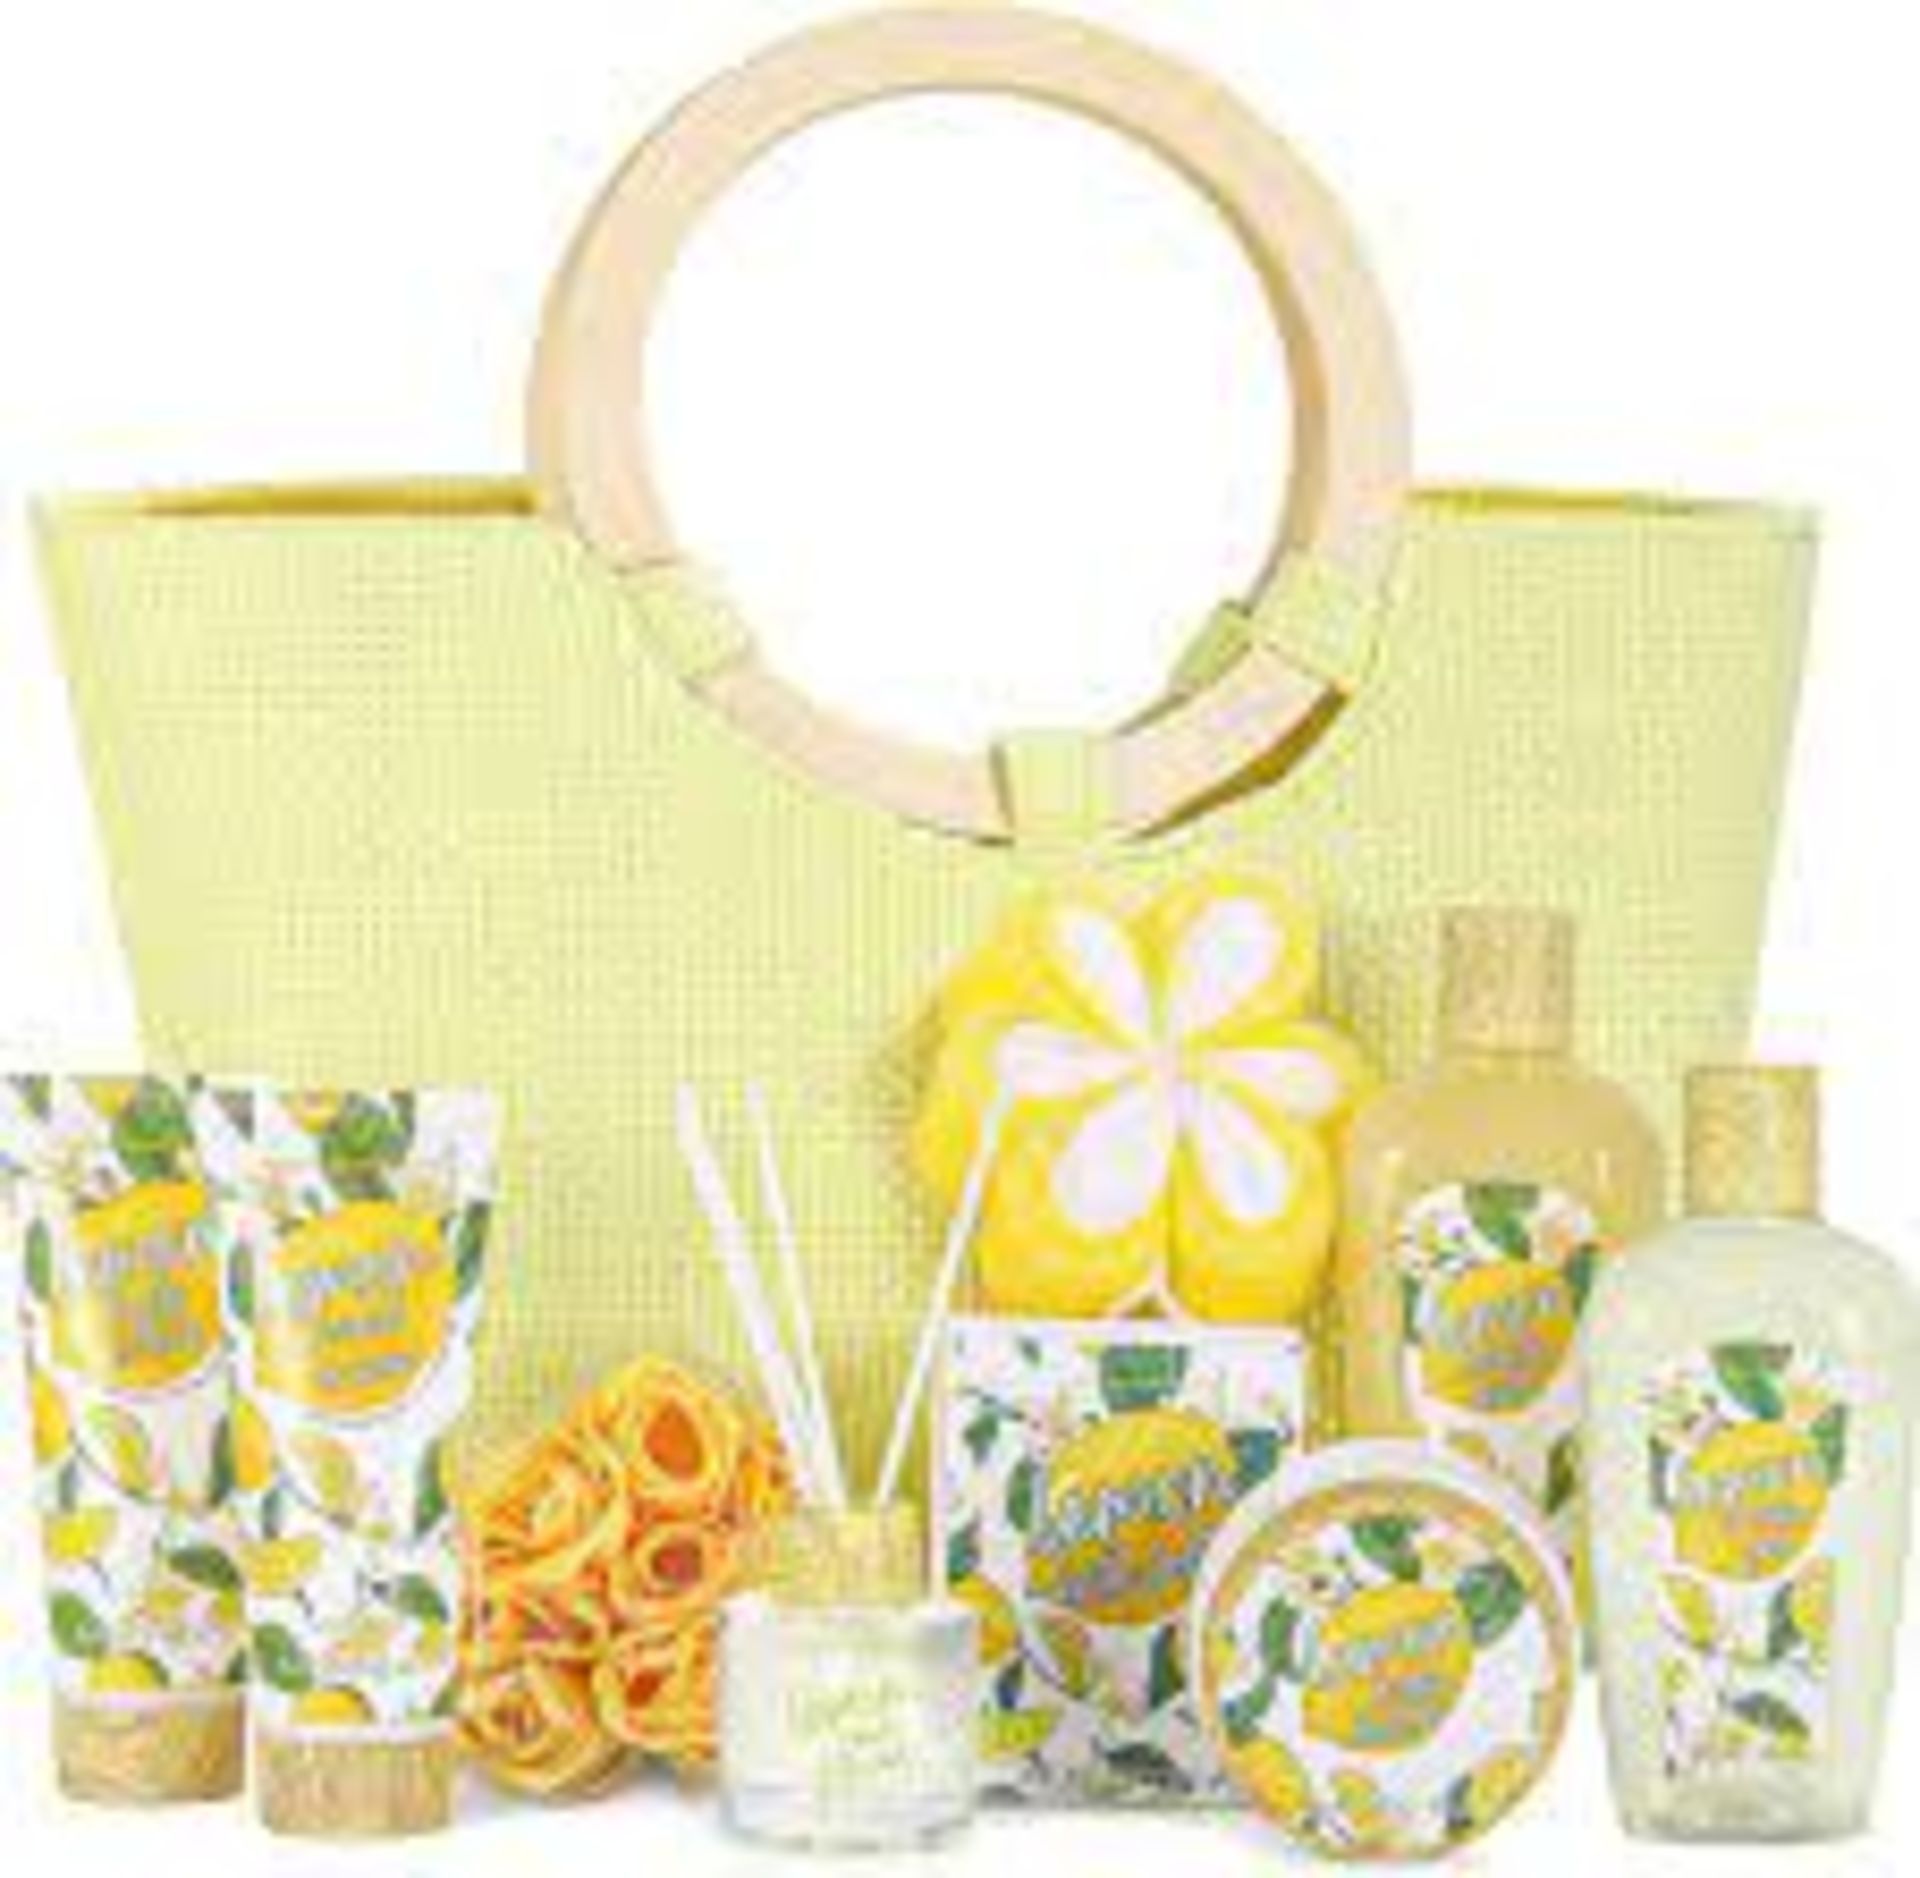 4 X NEW PACKAGED Lemon Everyday Bath Set Tote Gift Sets. (ROW10/11RACK). Home Spa Kit Meets Your All